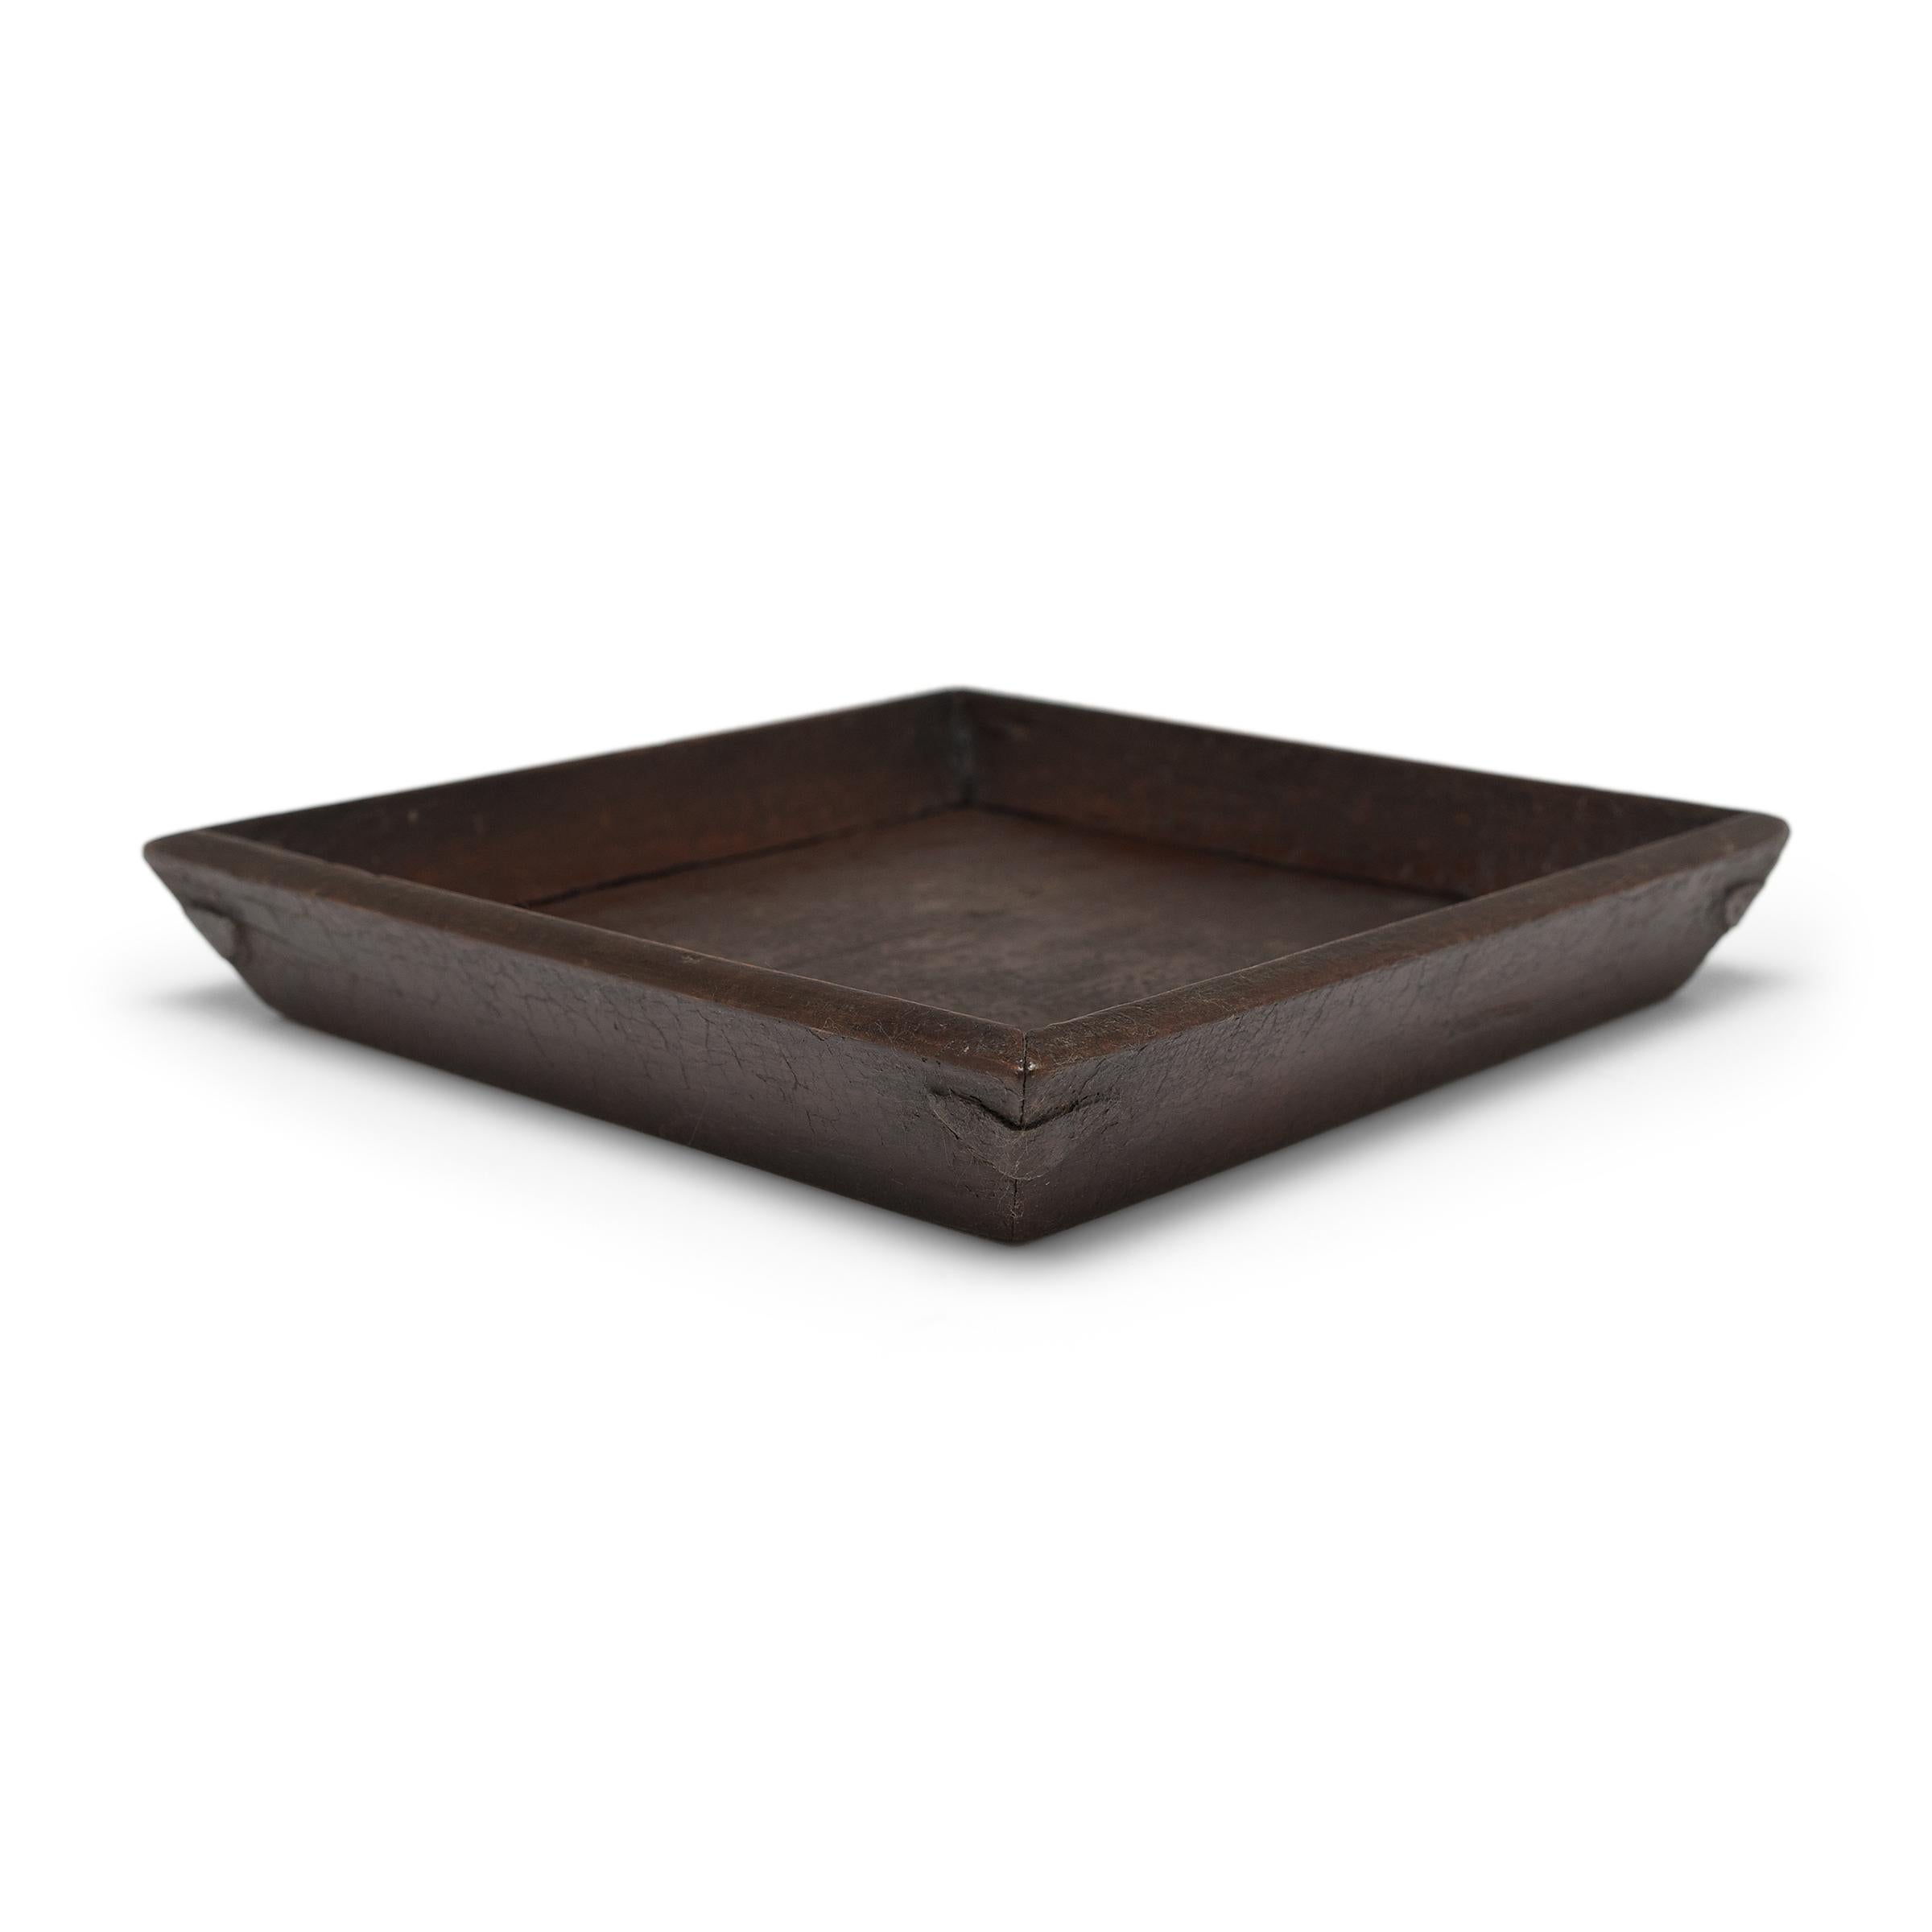 Simple lines, a modest form, and a layer of hand-brushed brown lacquer give this petite Qing-dynasty tray a provincial charm that recalls the warmth of home. A wooden tray like this would have been used to serve tea or food to friends and family